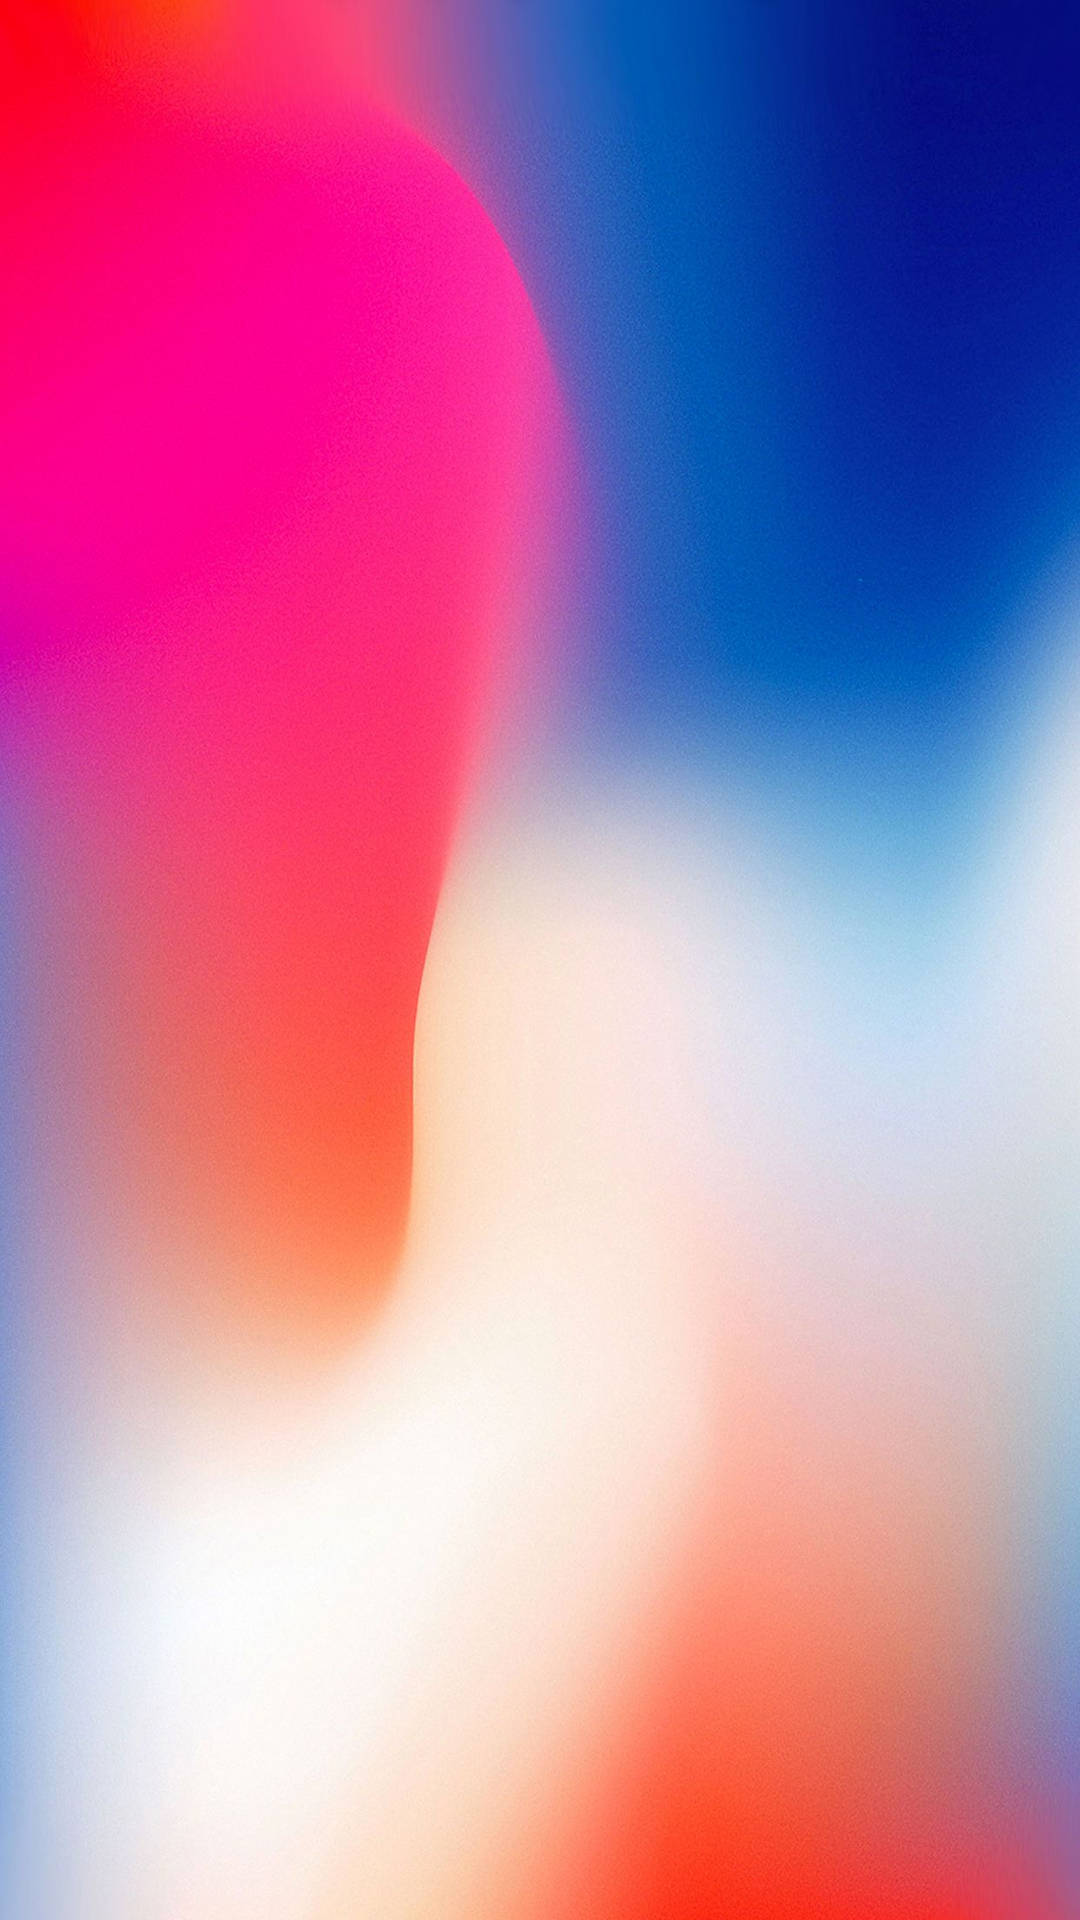 A unique blend of colors come alive on this beautiful Colorful Amoled wallpaper. Wallpaper